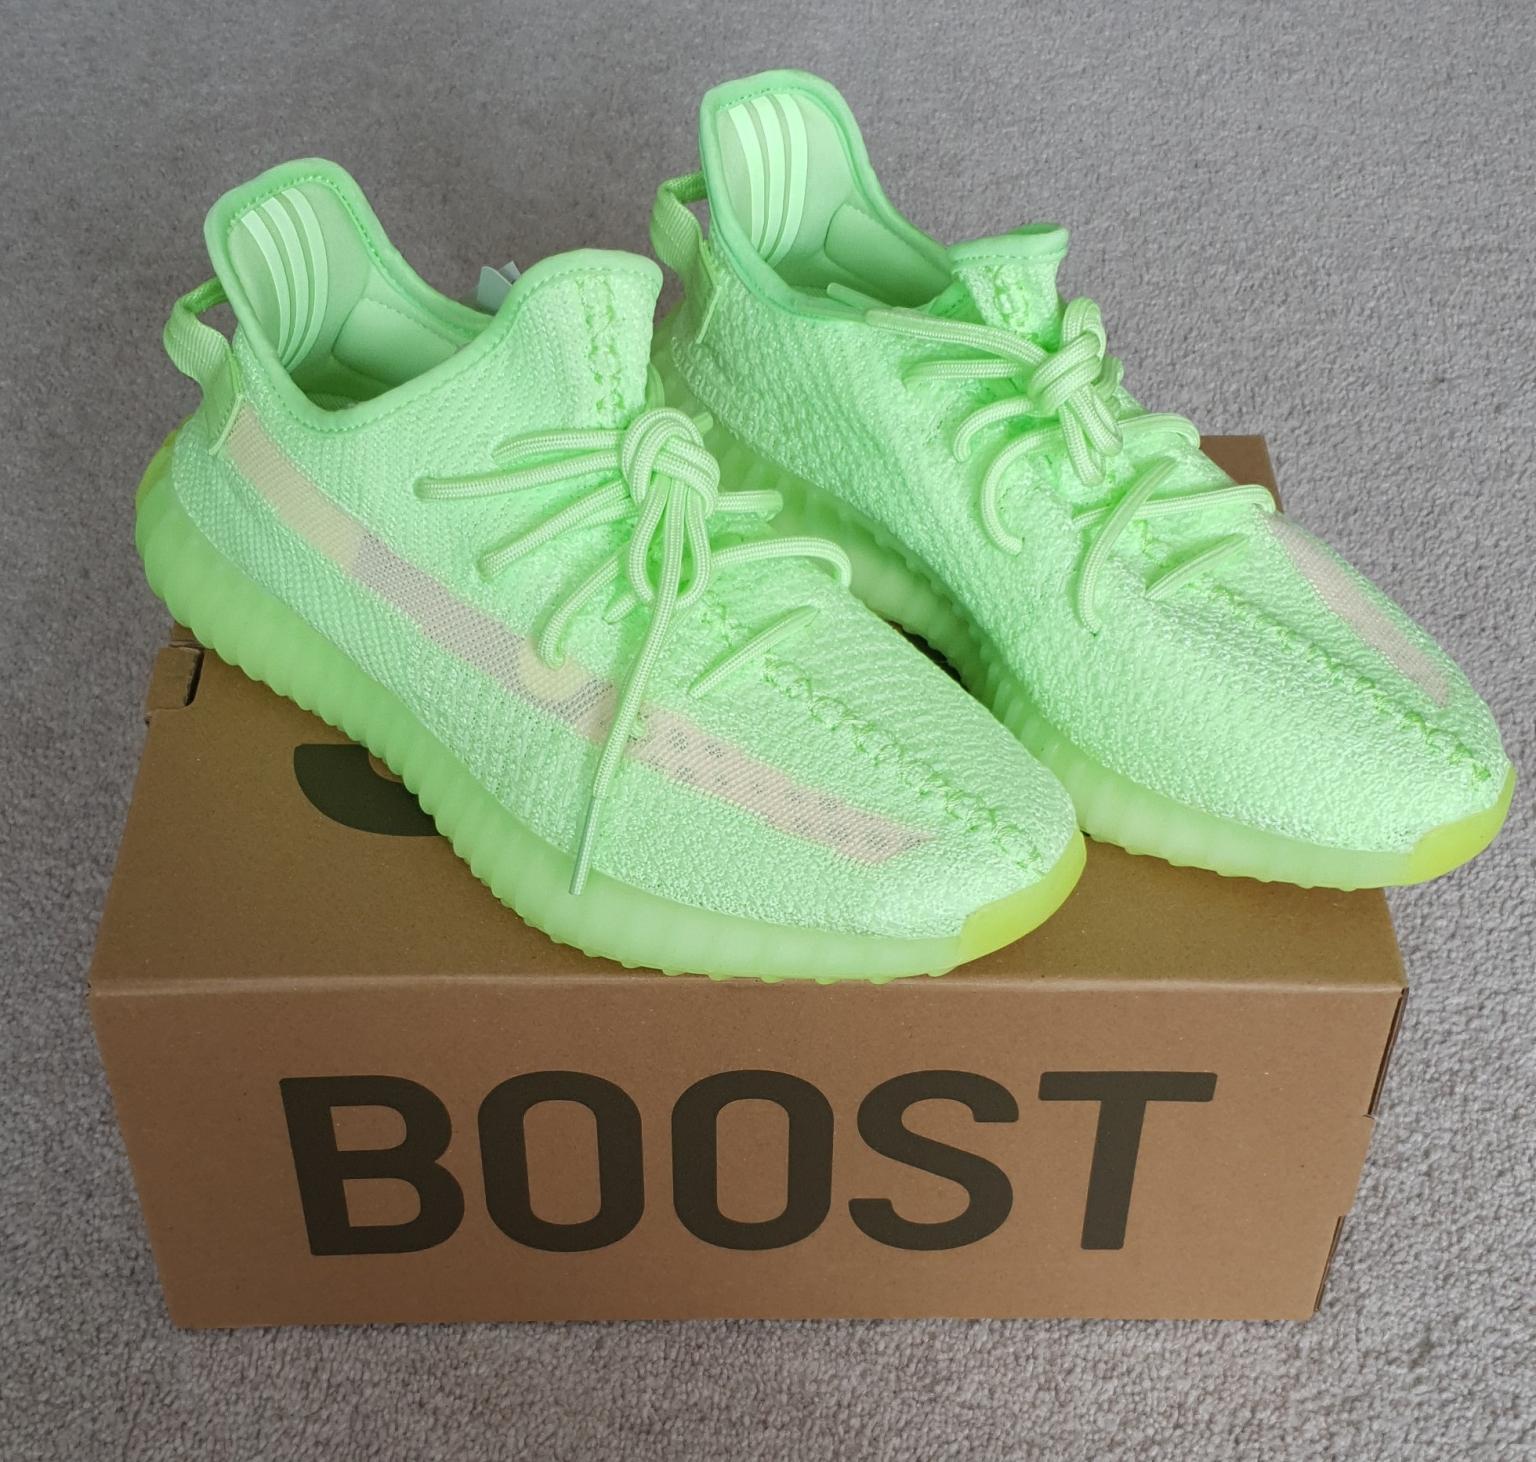 Cheap Ad Yeezy 350 Boost V2 Kids Shoes076